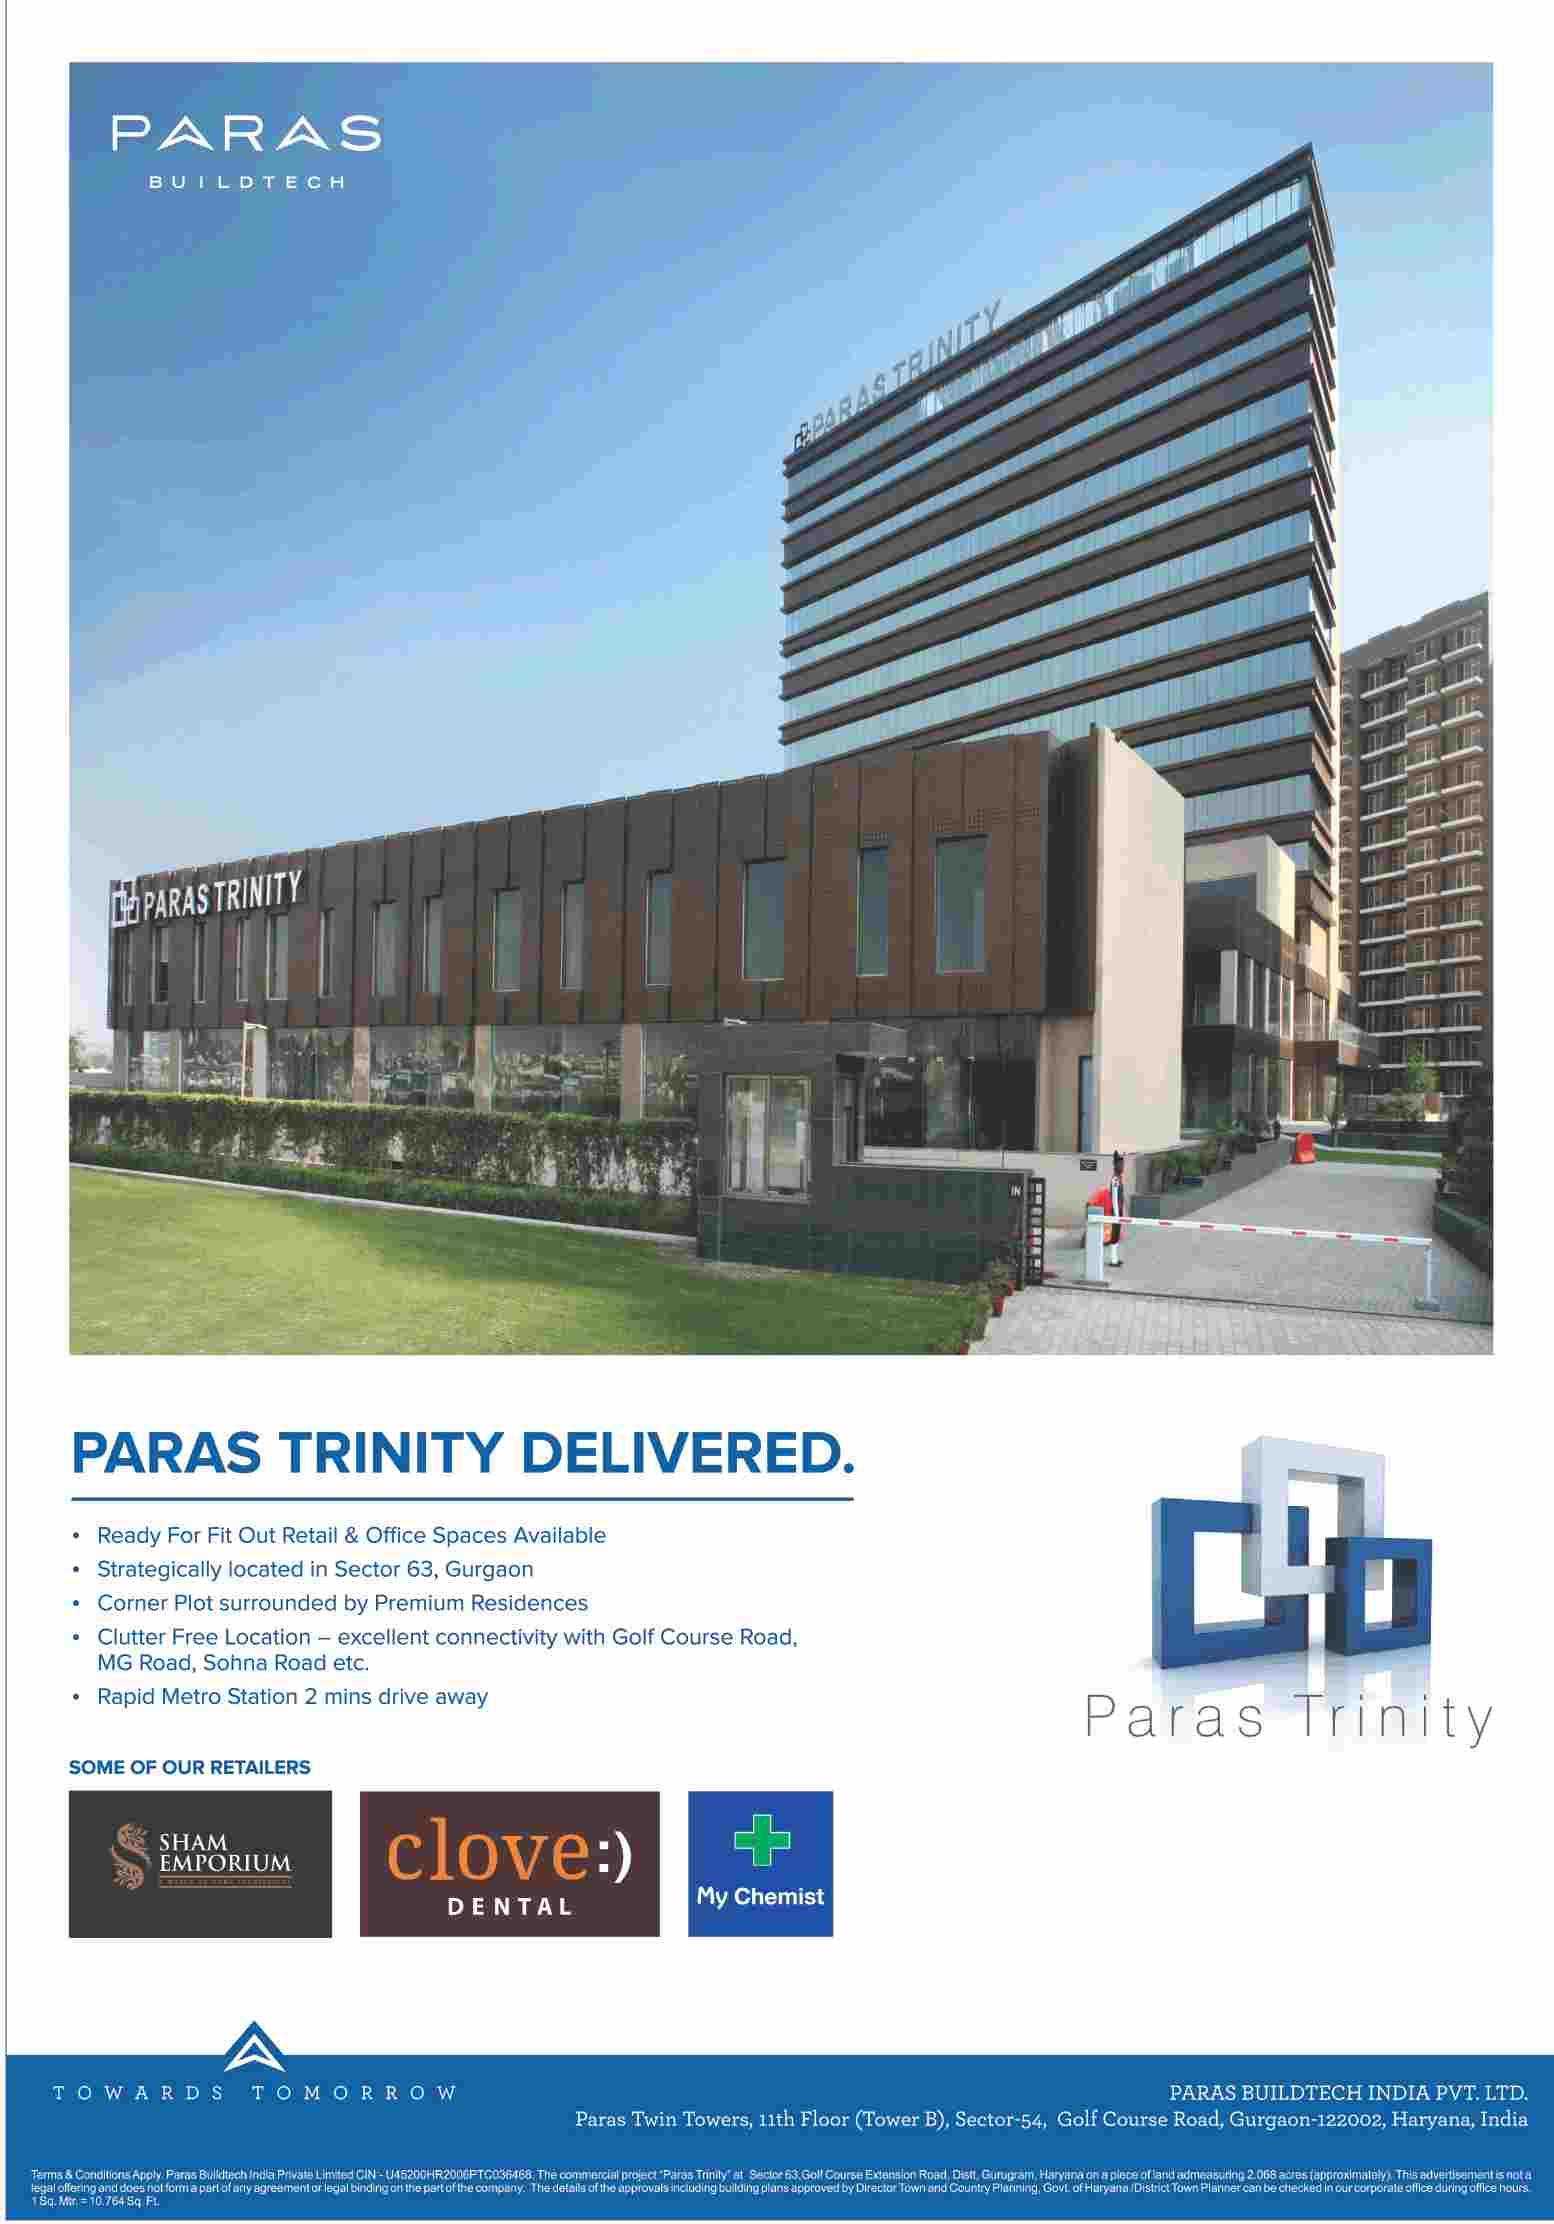 Ready for fit-out retail and office spaces available at Paras Trinity in Gurgaon Update